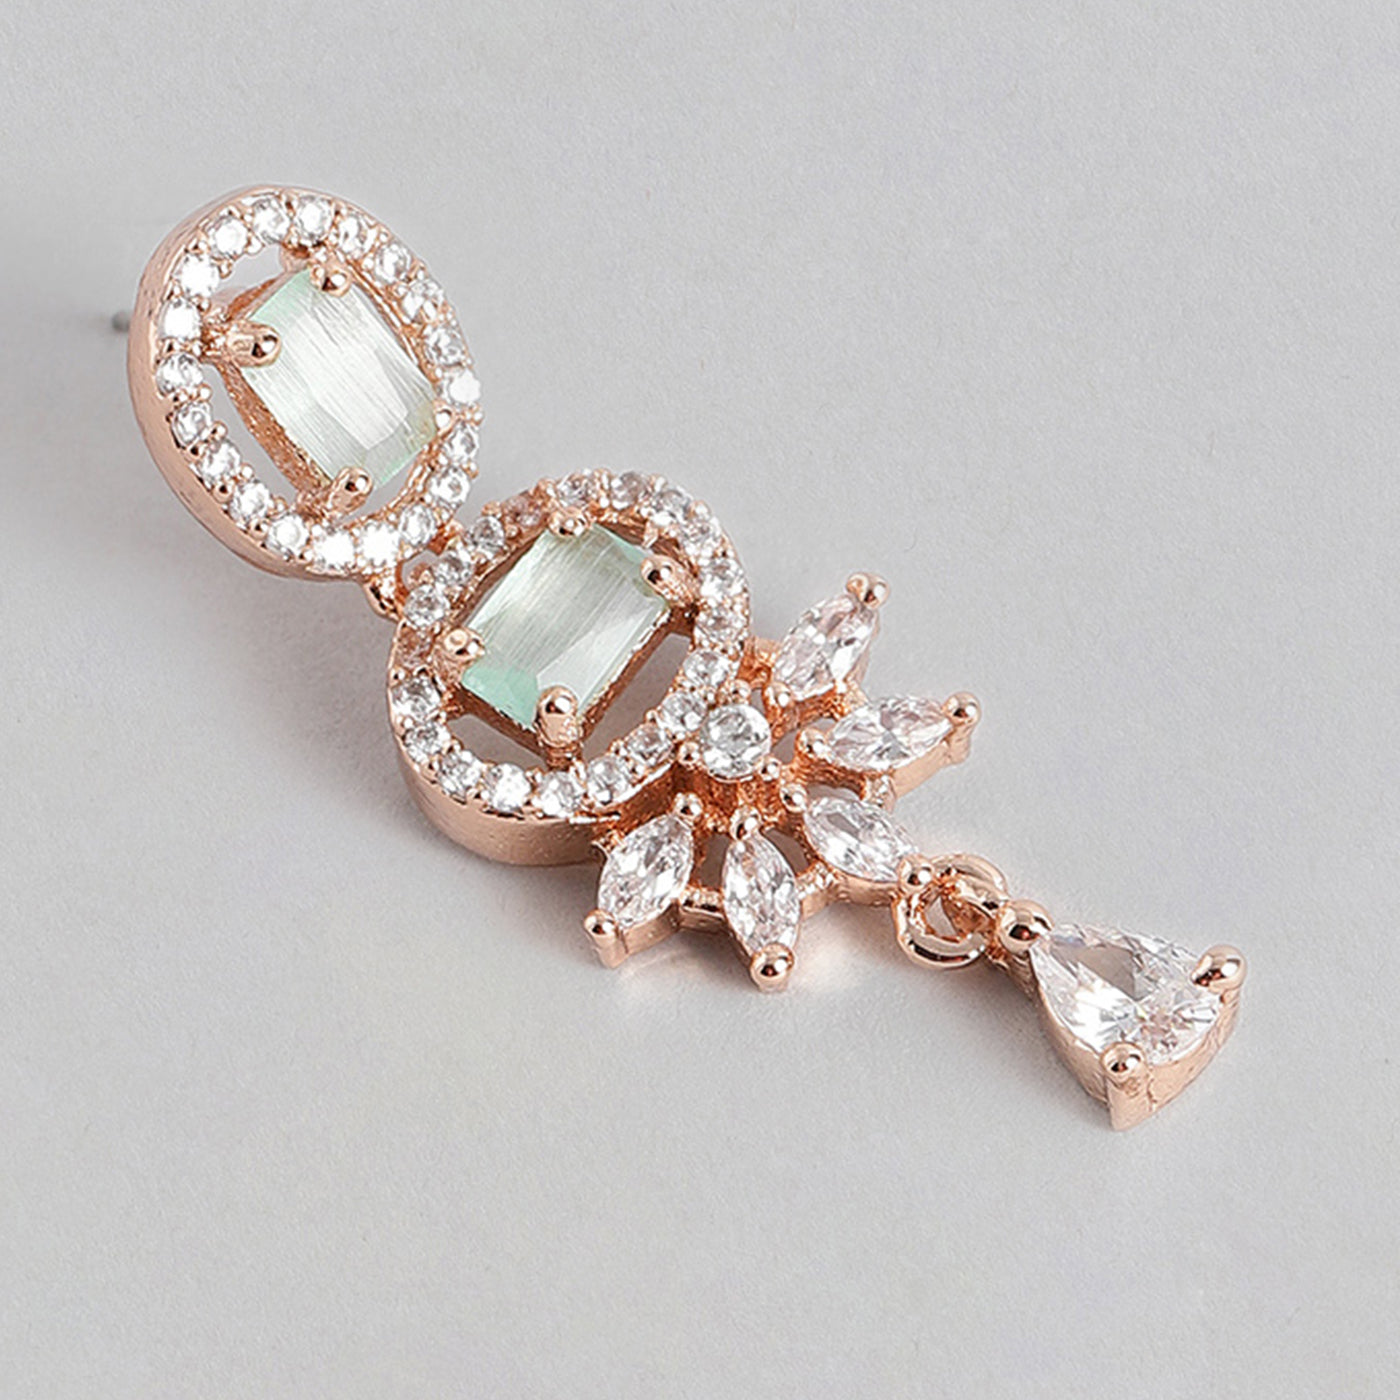 Estele Rose Gold Plated CZ Charming Earrings with Mint Green Crystals for Women